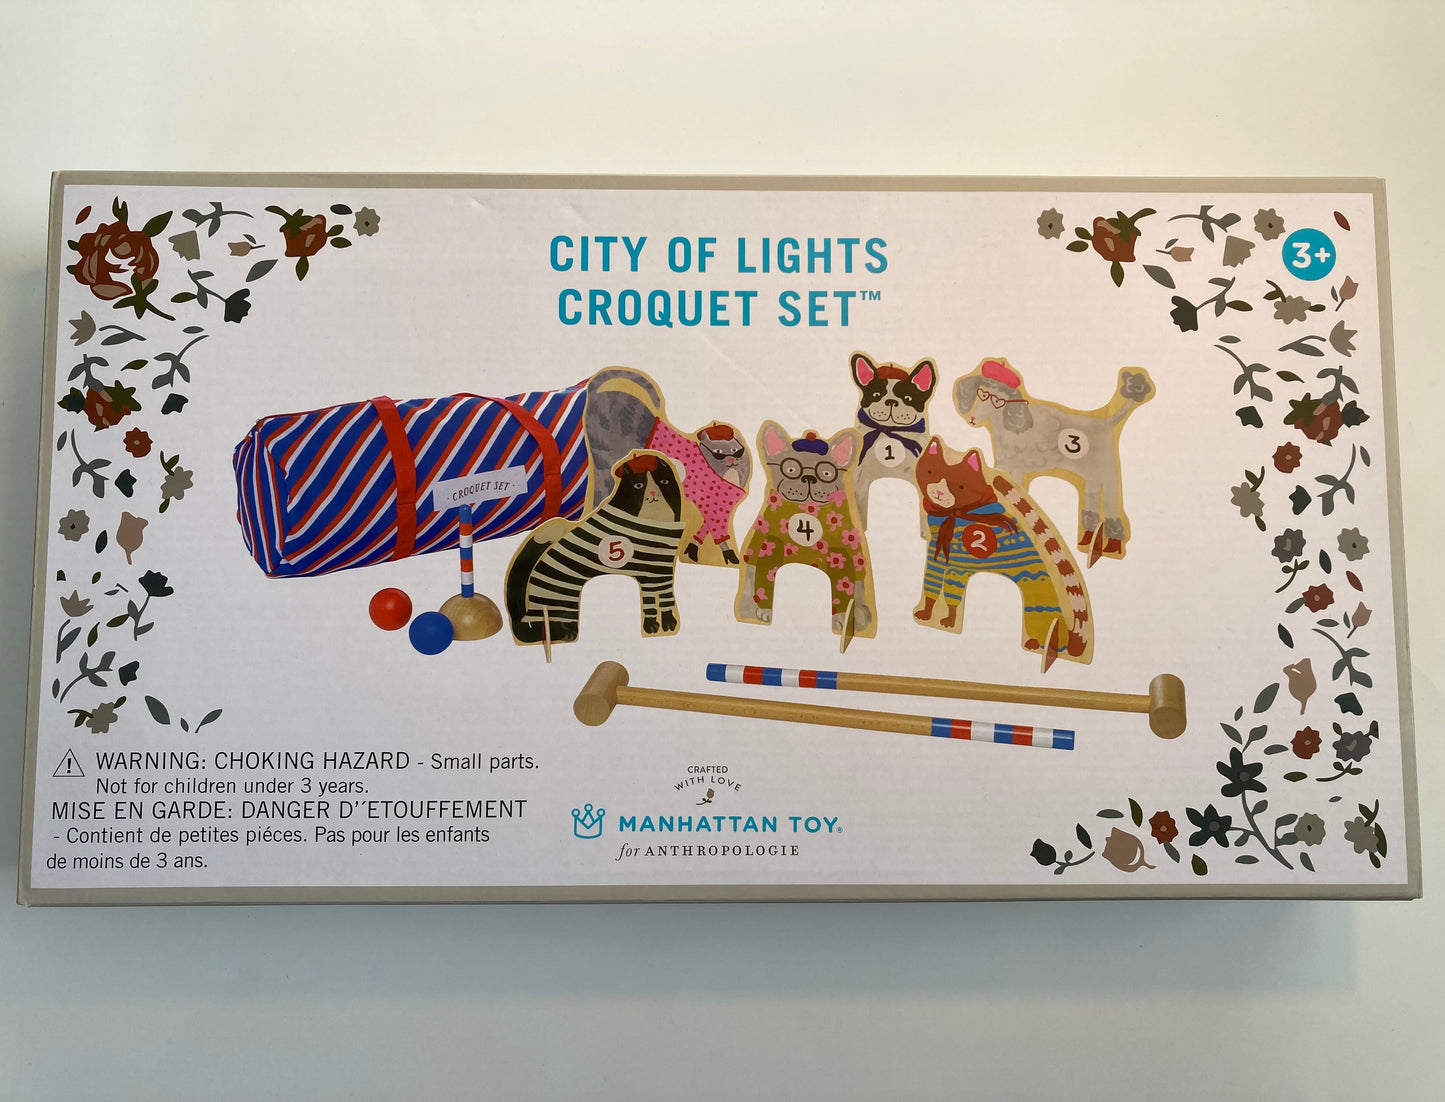 City of Lights croquet set NIB - by Manhattan Toy Company for Anthropologie